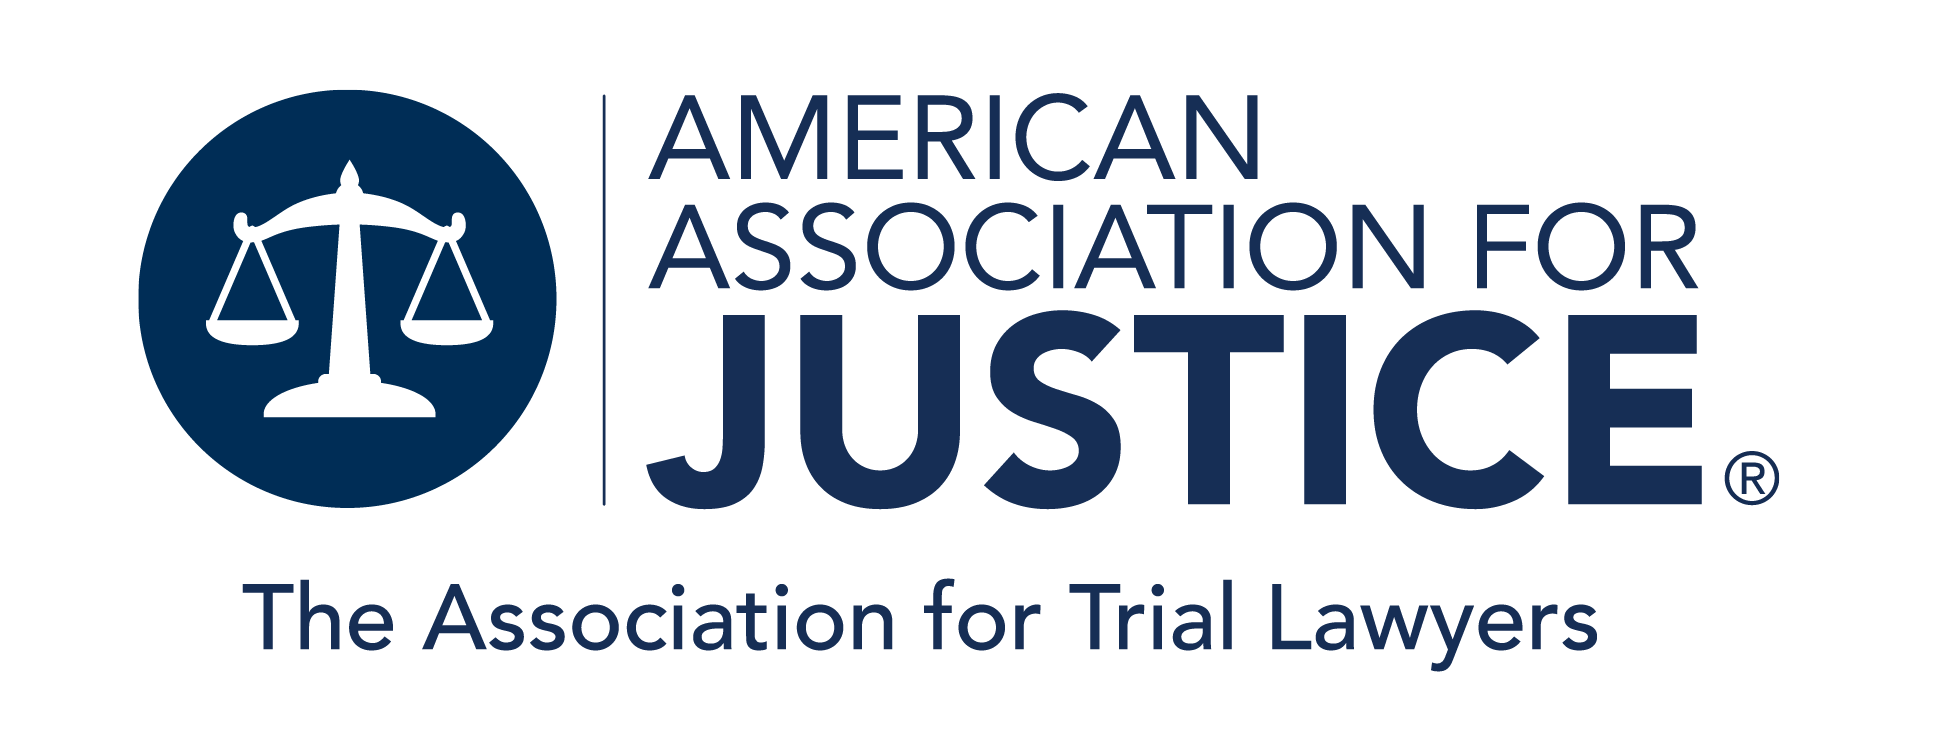 American Association for Justice®